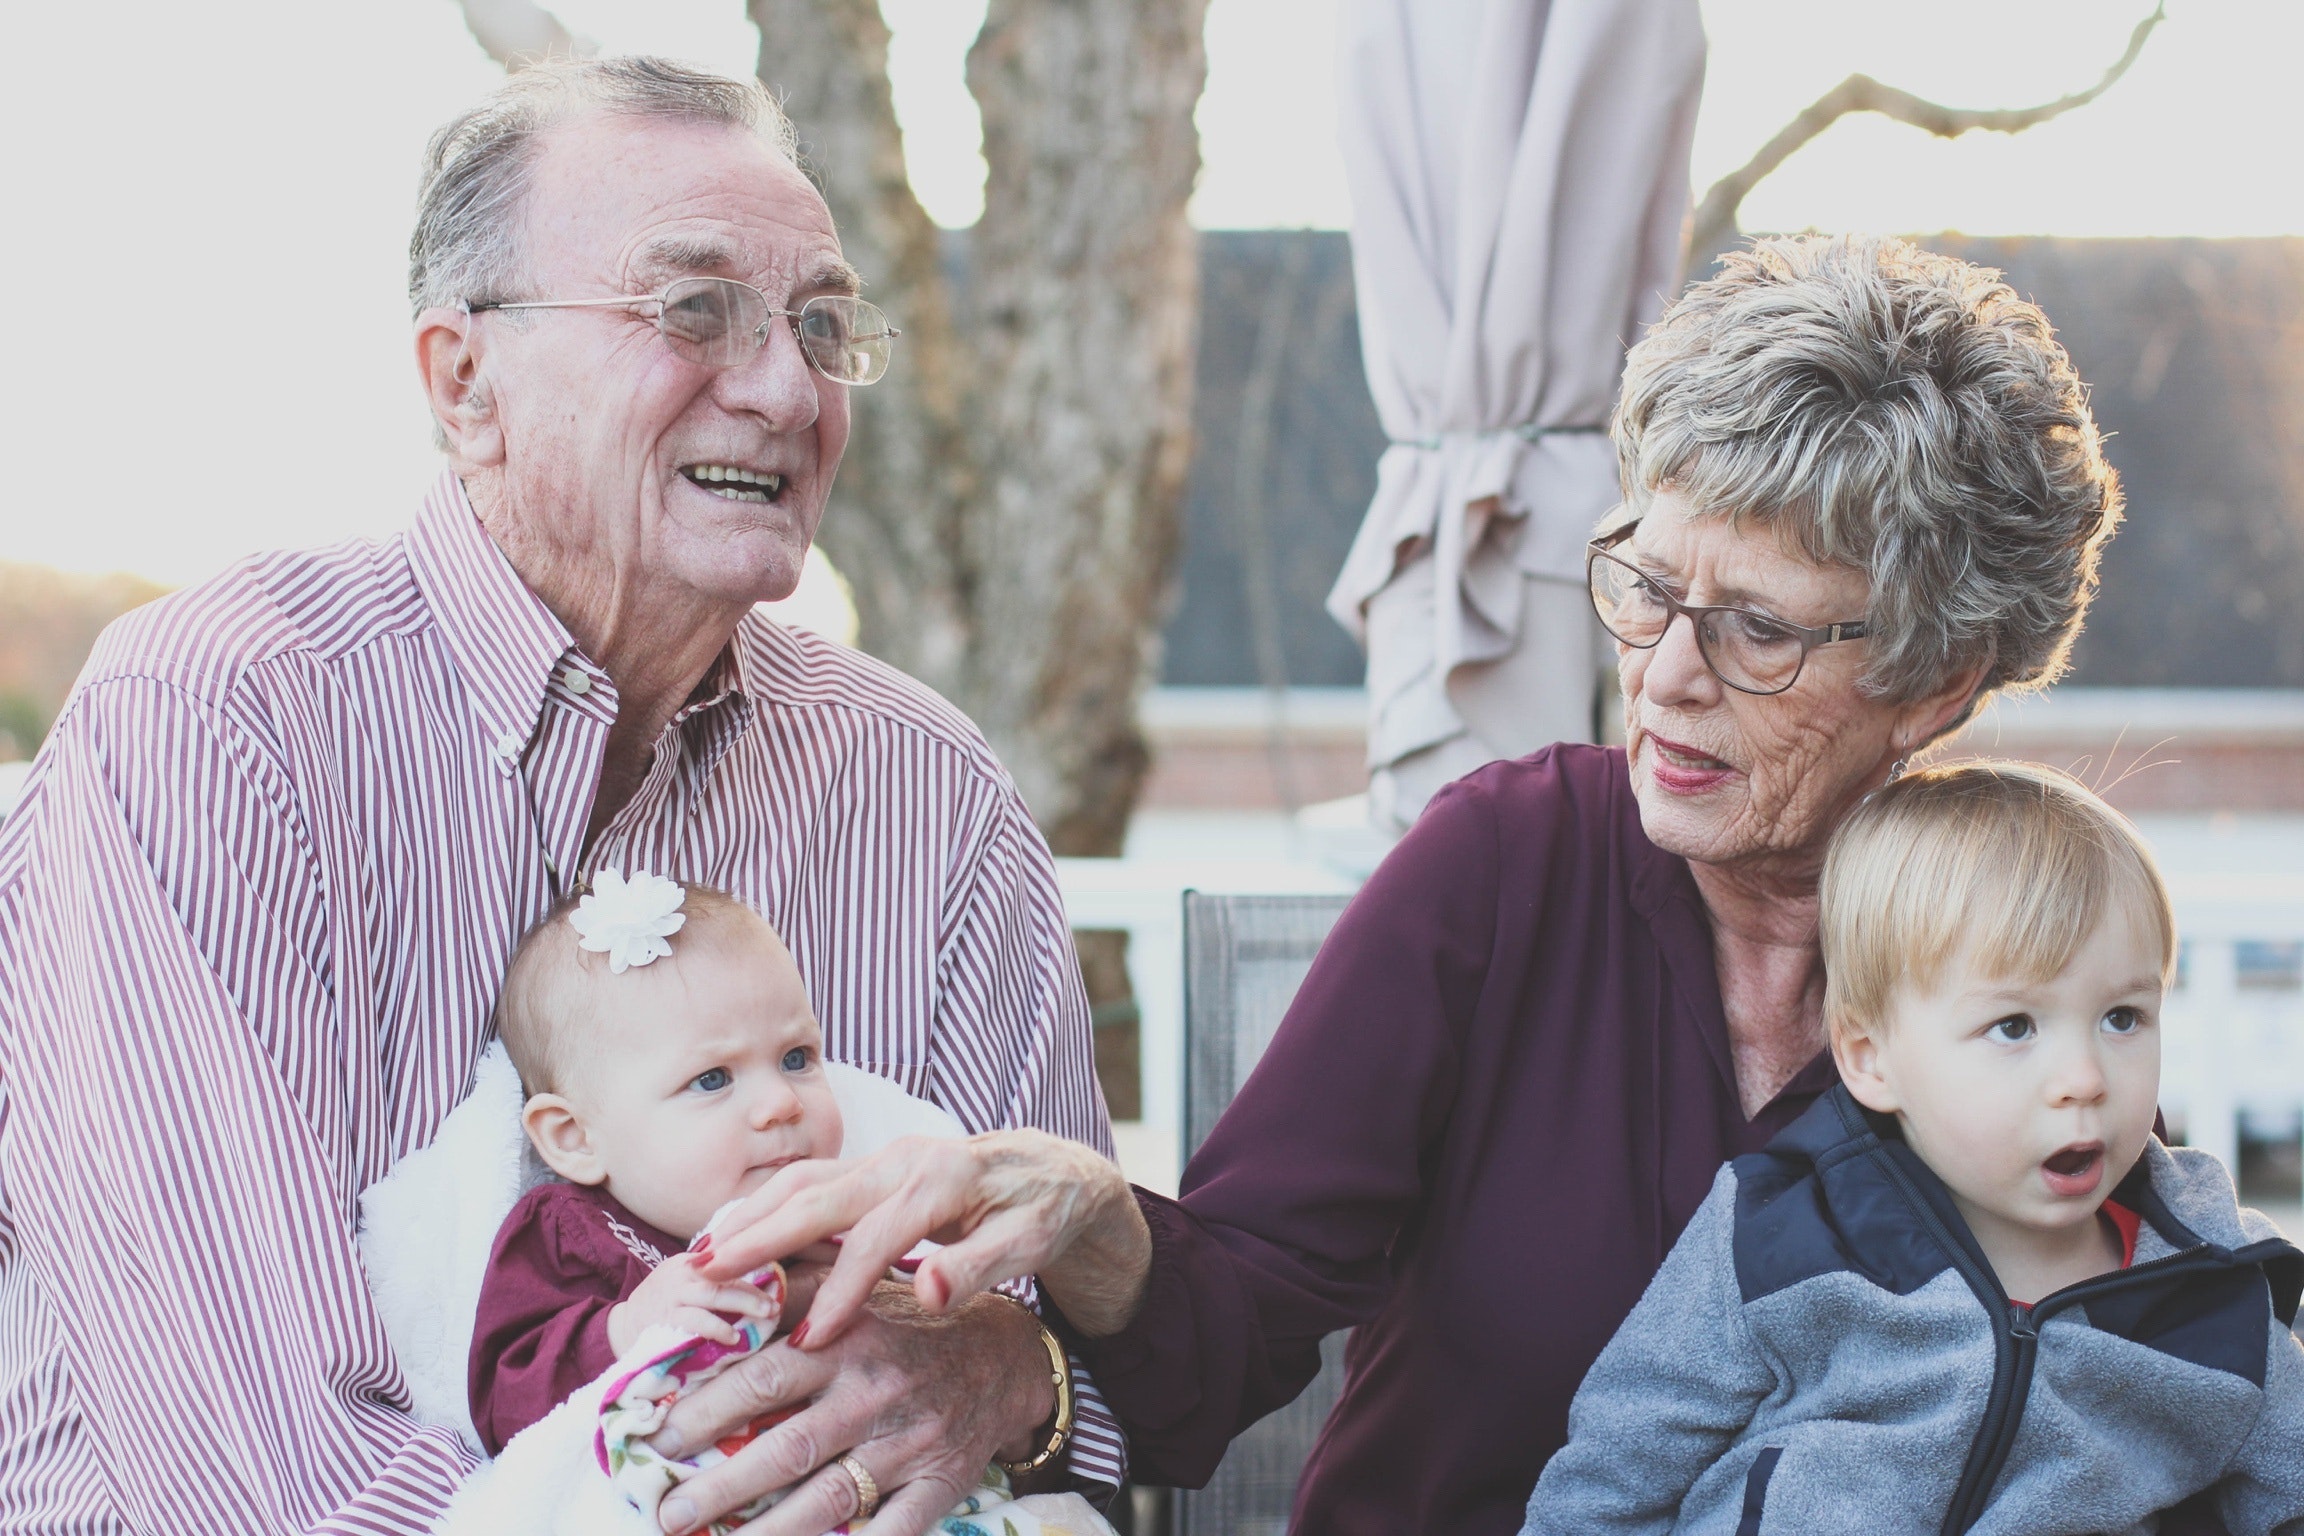 Older white man and woman sit outside with two young white children